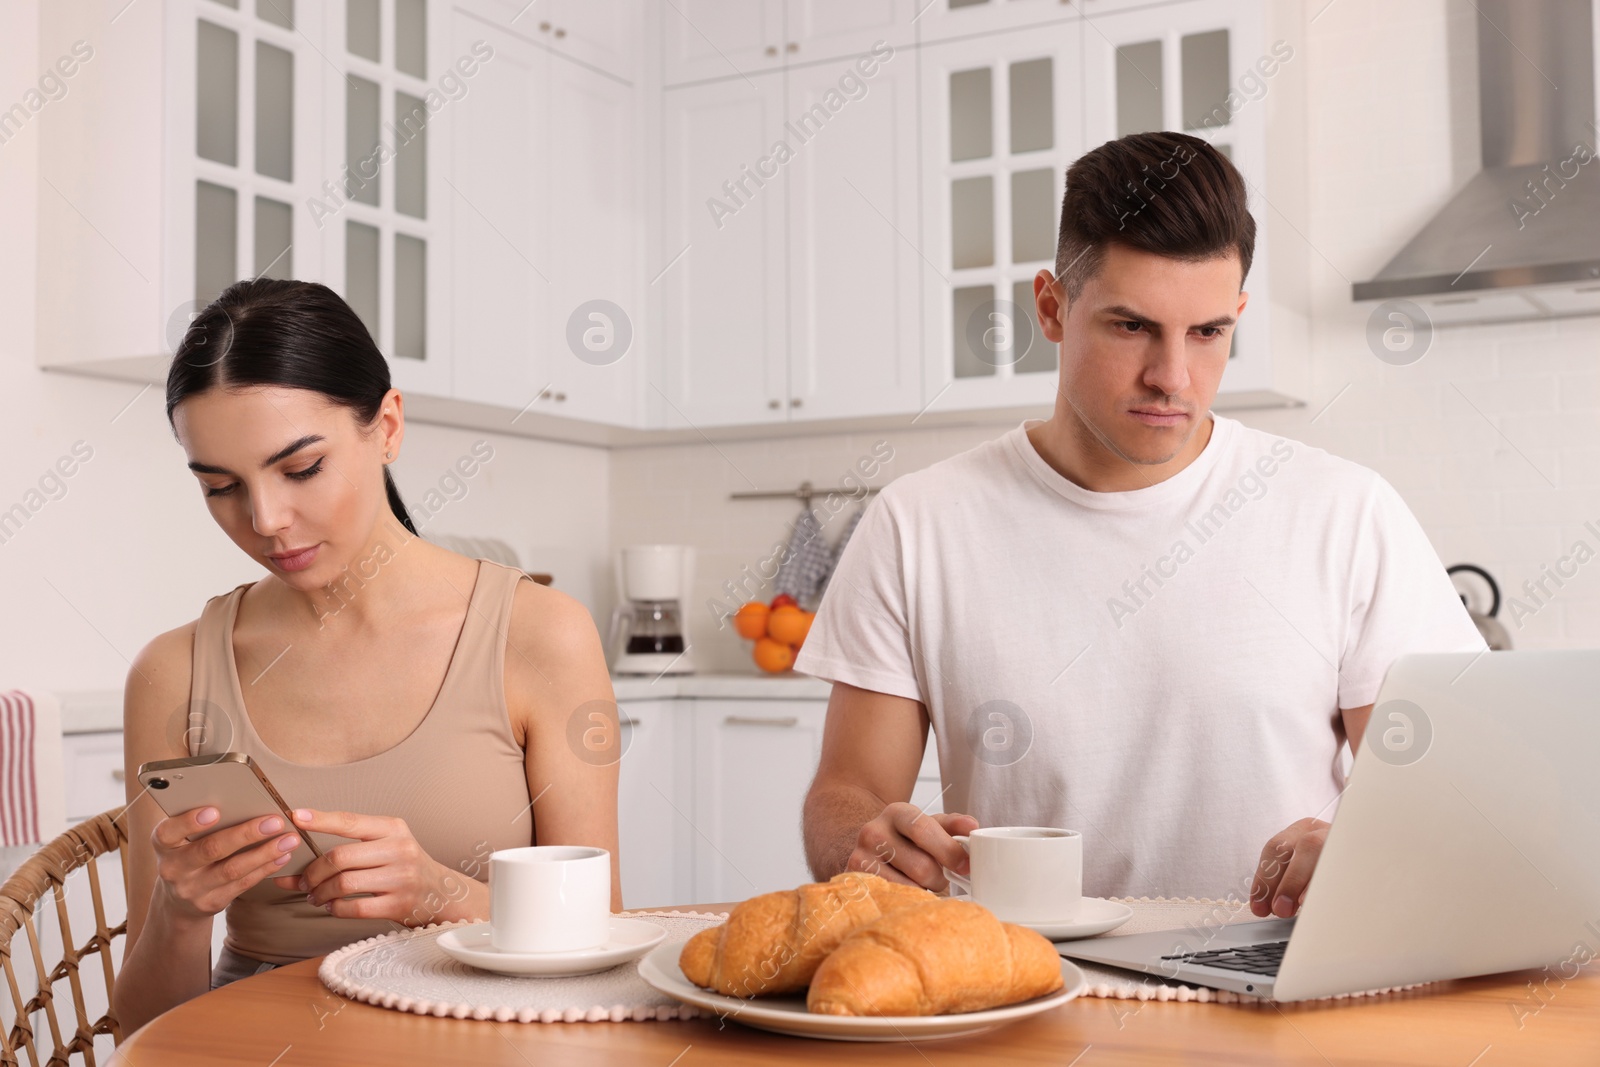 Photo of Internet addiction. Couple using gadgets at table in kitchen